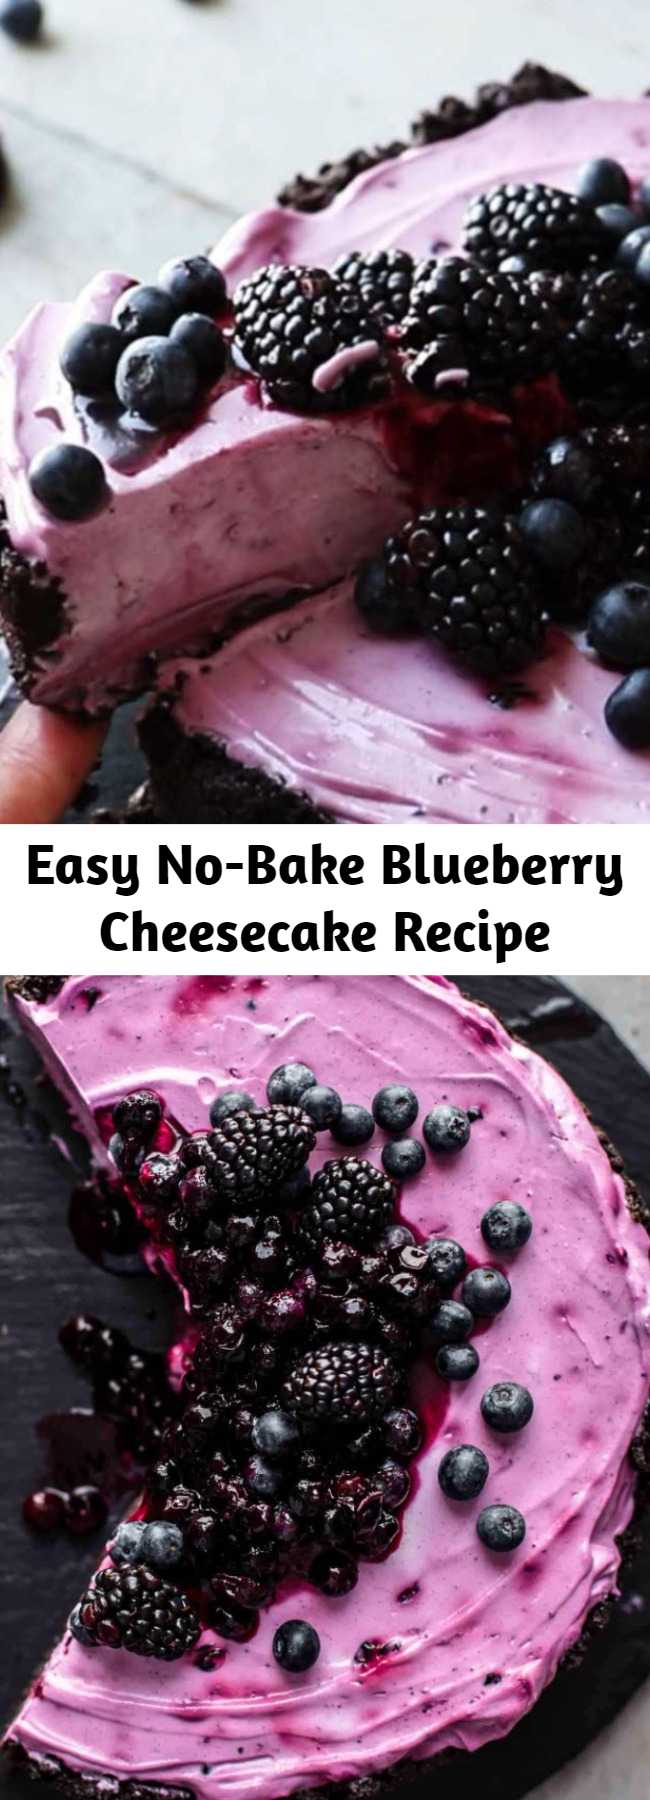 Easy No-Bake Blueberry Cheesecake Recipe - This No-Bake Blueberry Cheesecake is very easy to make and super delicious. You need just 9 ingredients. It comes with a super creamy blueberry filling made with homemade blueberry sauce from scratch and a no-bake Oreo cookie crust. #blueberry #cheesecake #oreocookie #blueberrycheesecake #nobake